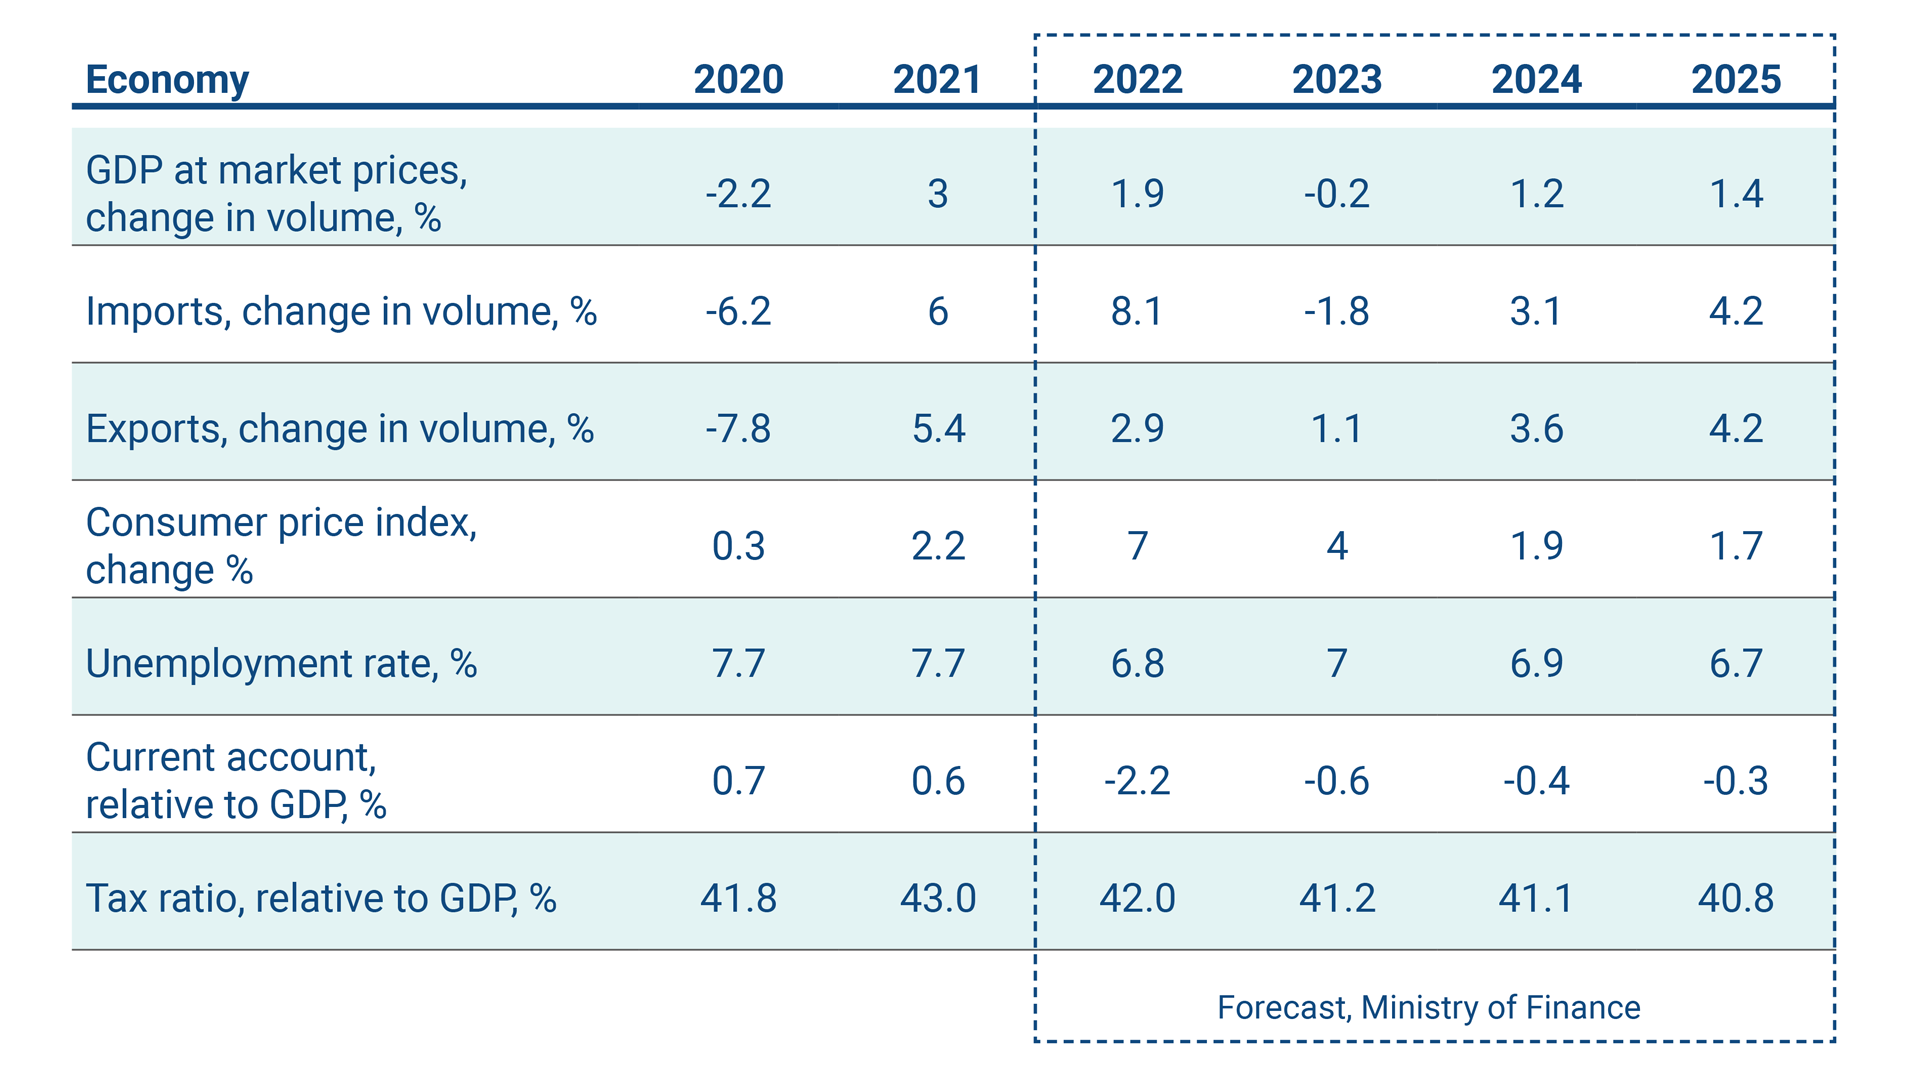 The table shows the key figures of the Finnish economy in 2020-2025.